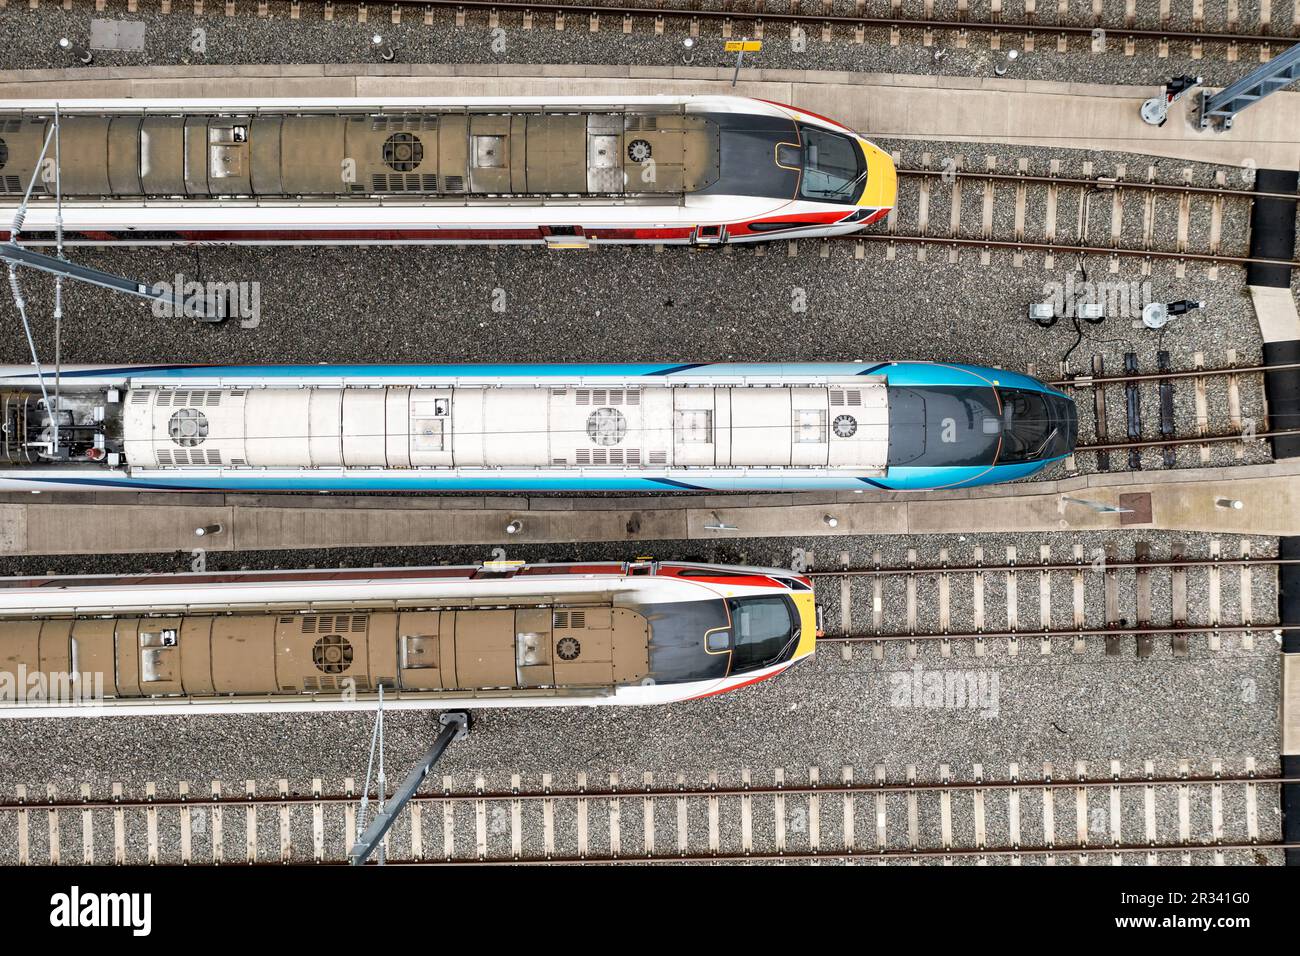 Aerial view directly above high speed passenger trains heading towards a railway junction in a rail accident concept image Stock Photo